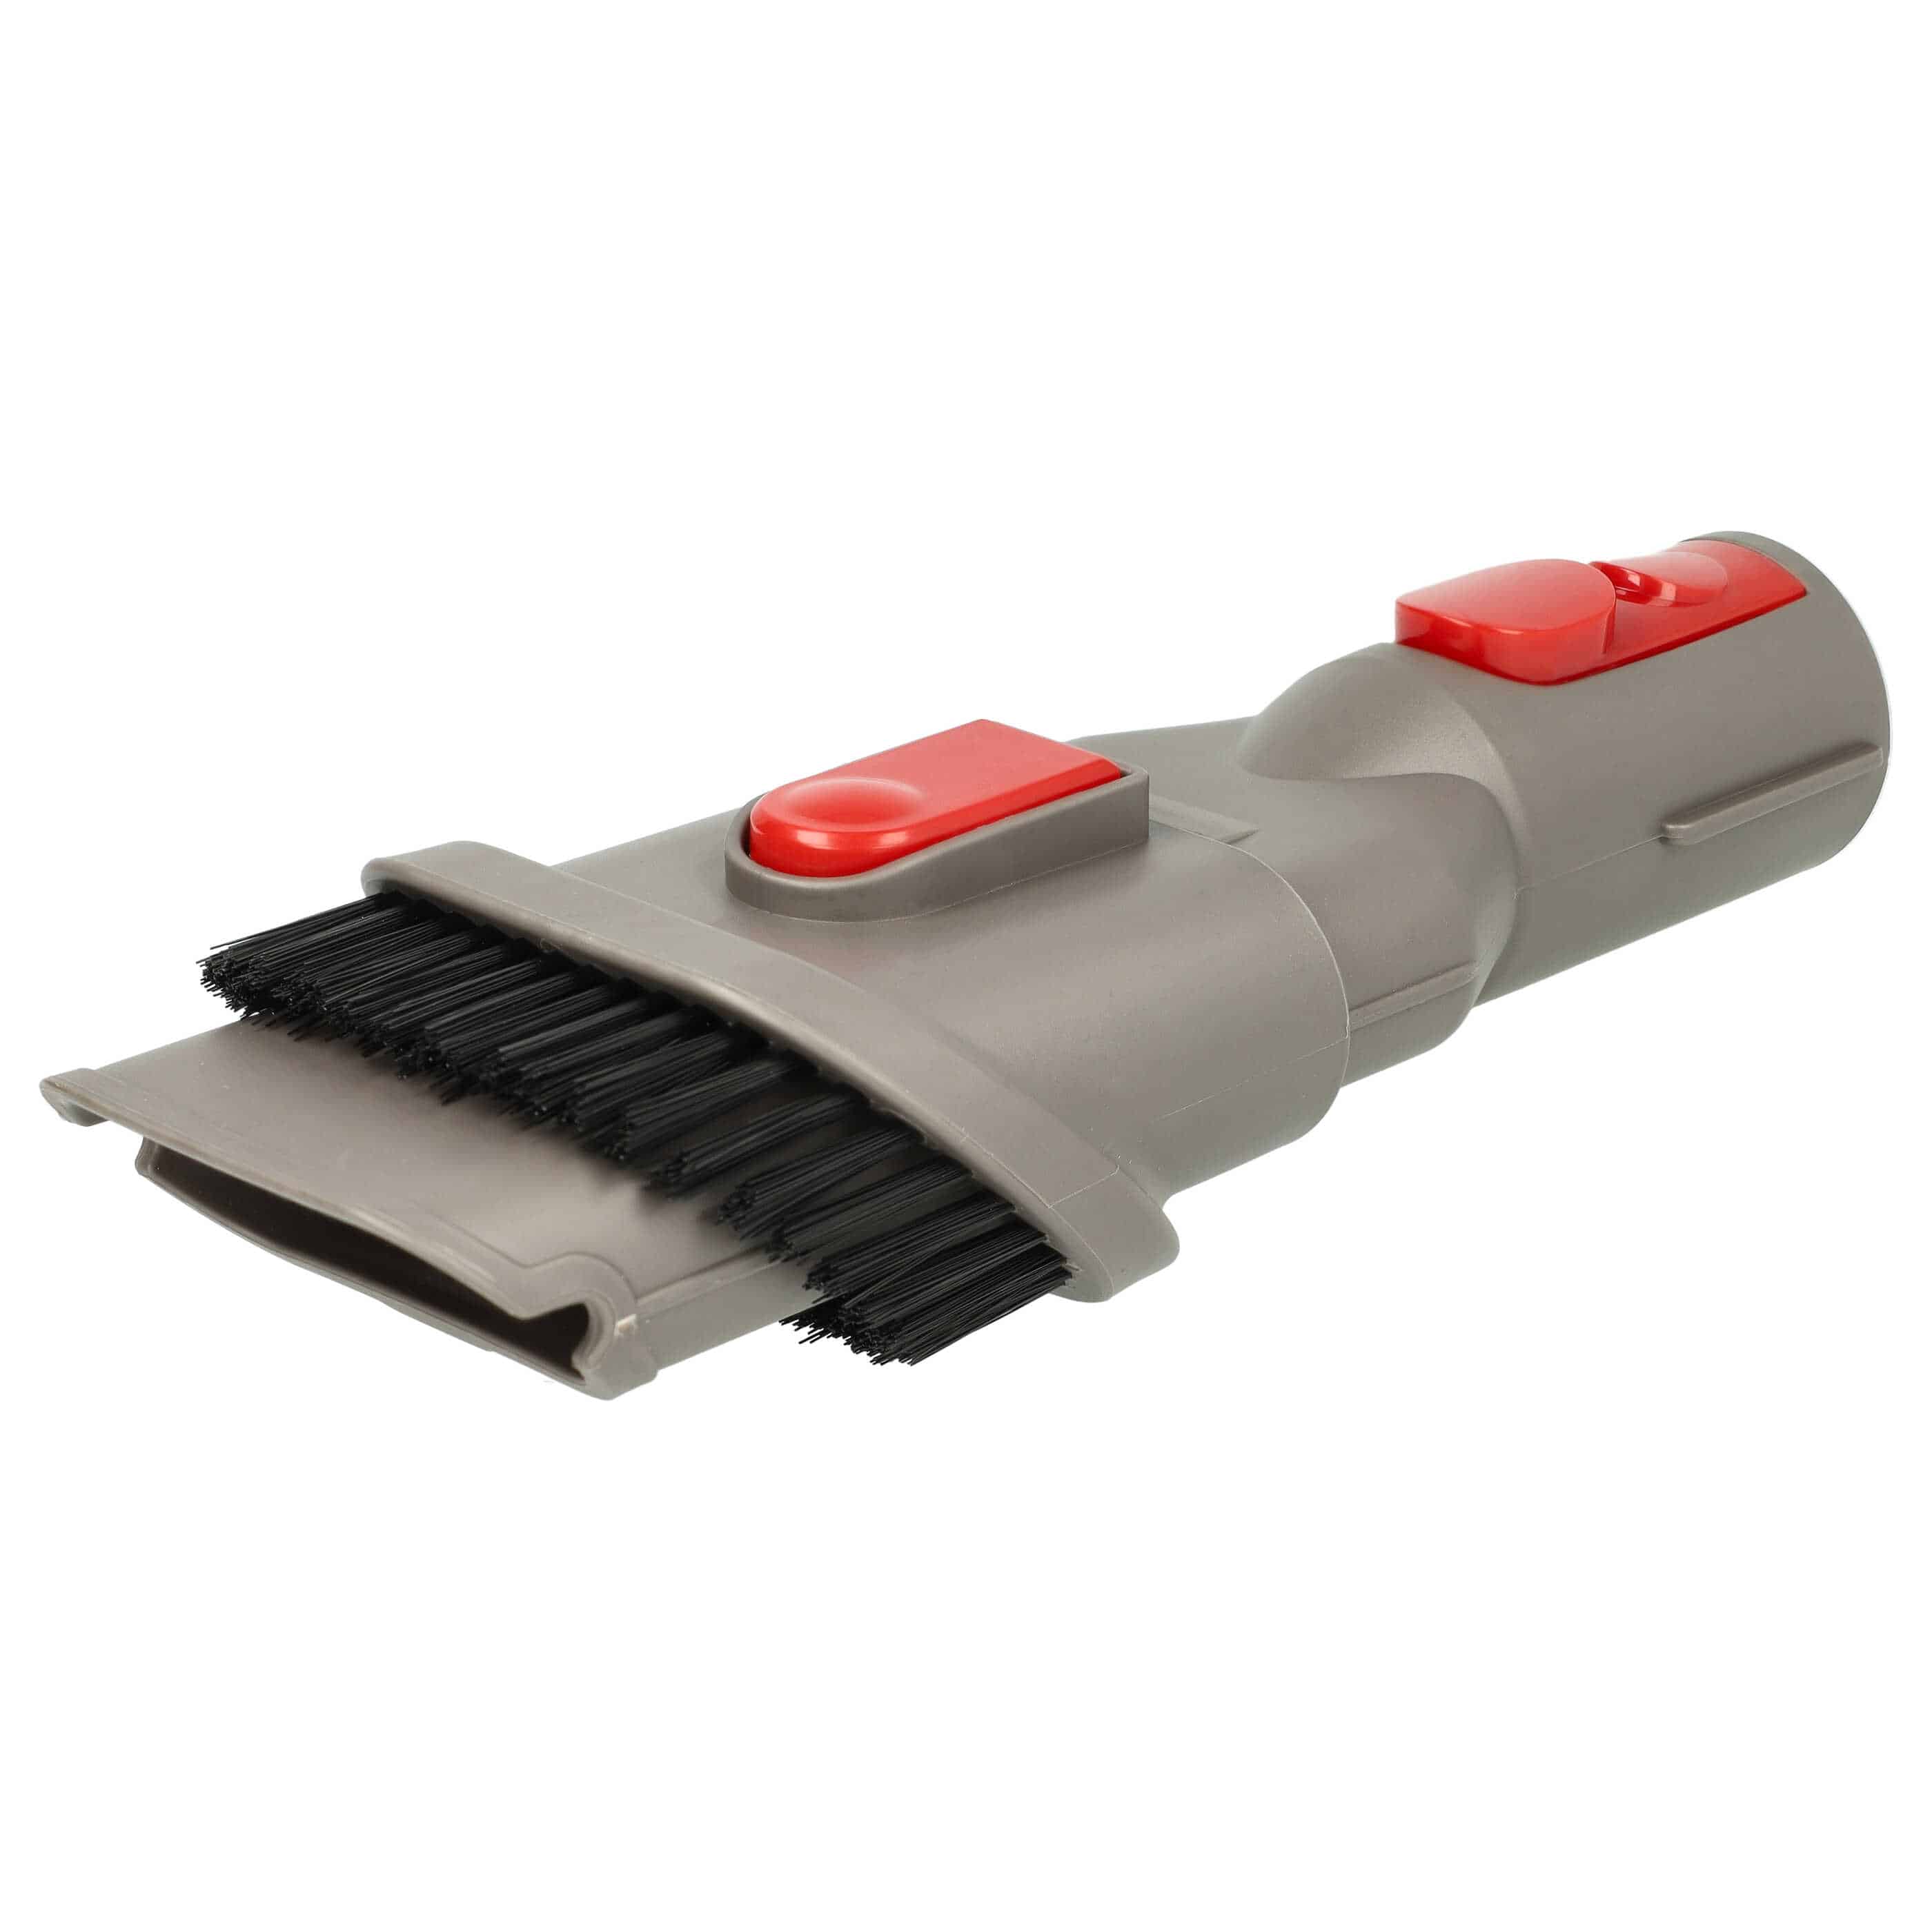  2-in-1 Combi / Crevice Tool for Dyson SV10 Vacuum Cleaner etc. - Furniture Brush with Bristles